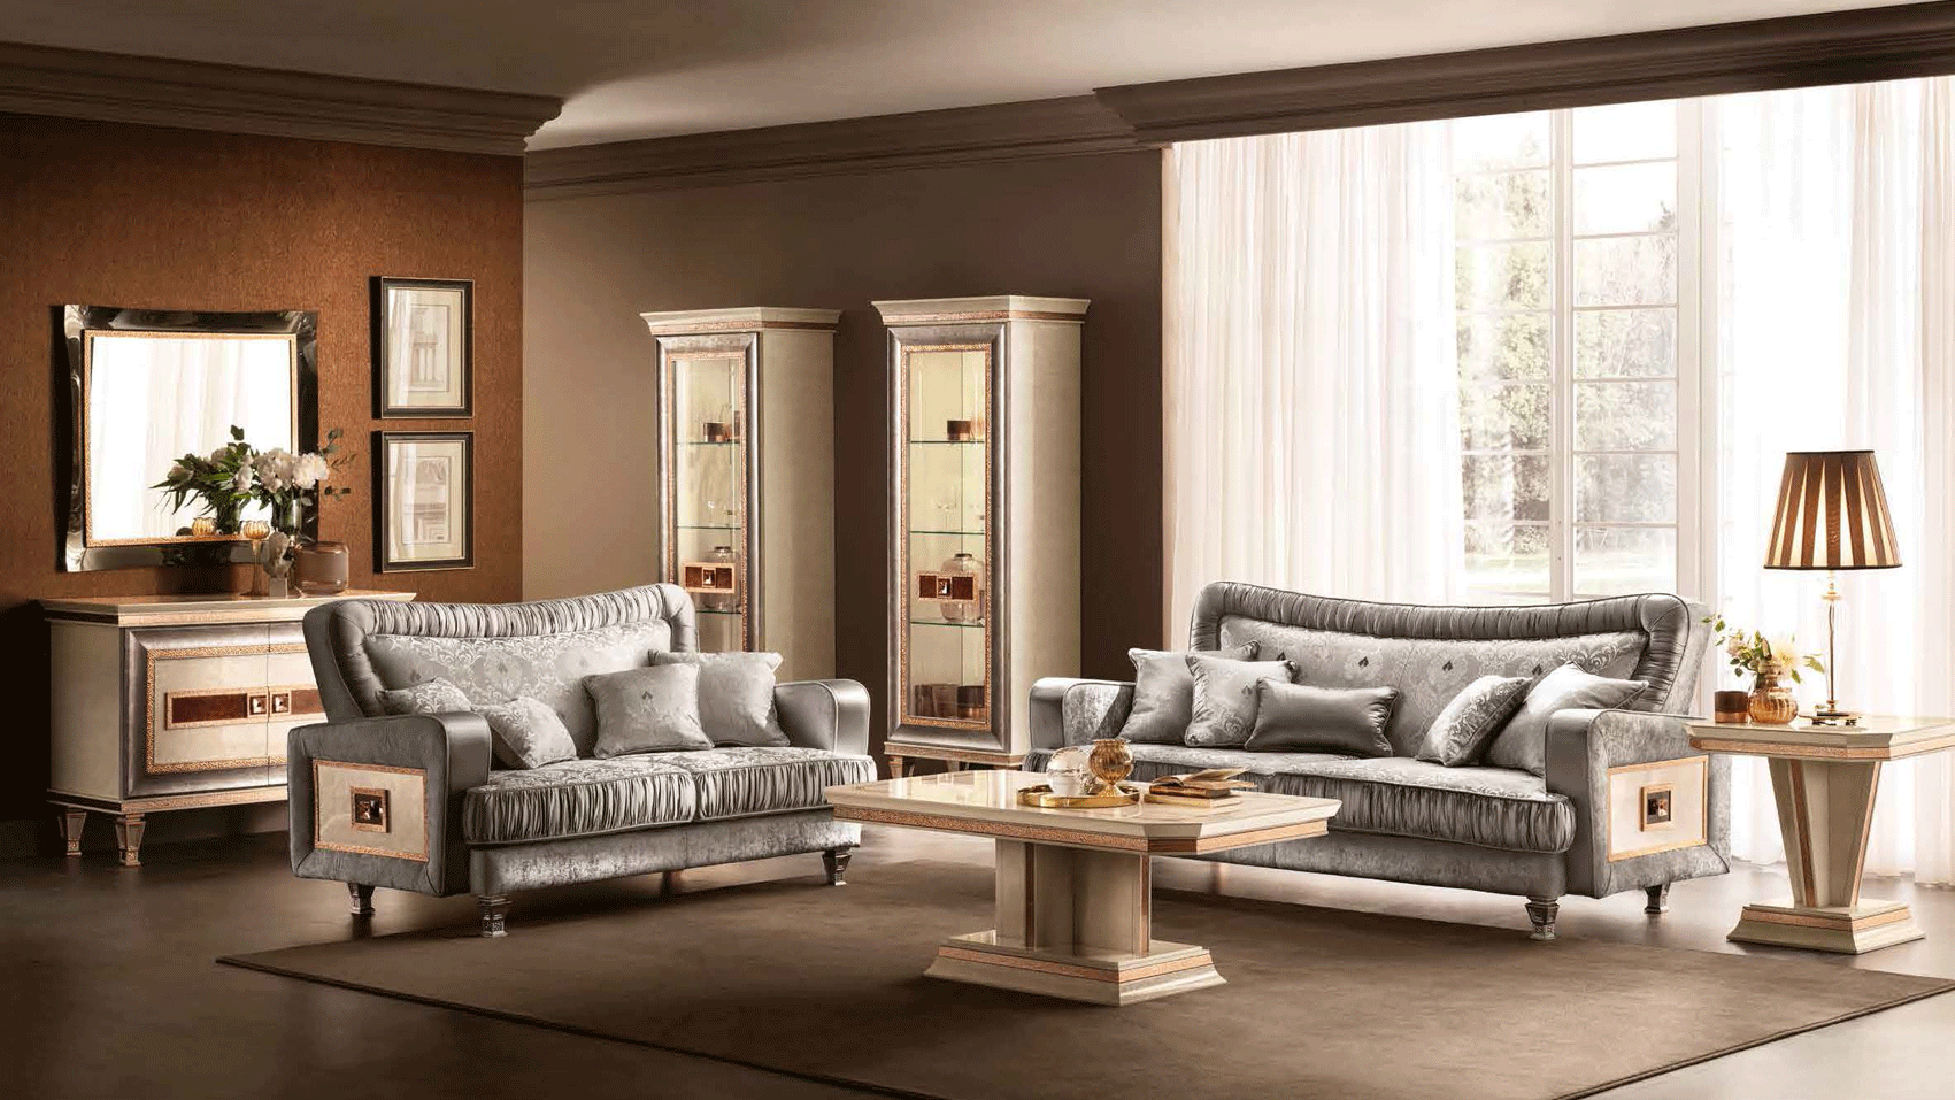 Living Room Furniture Sleepers Sofas Loveseats and Chairs Dolce Vita